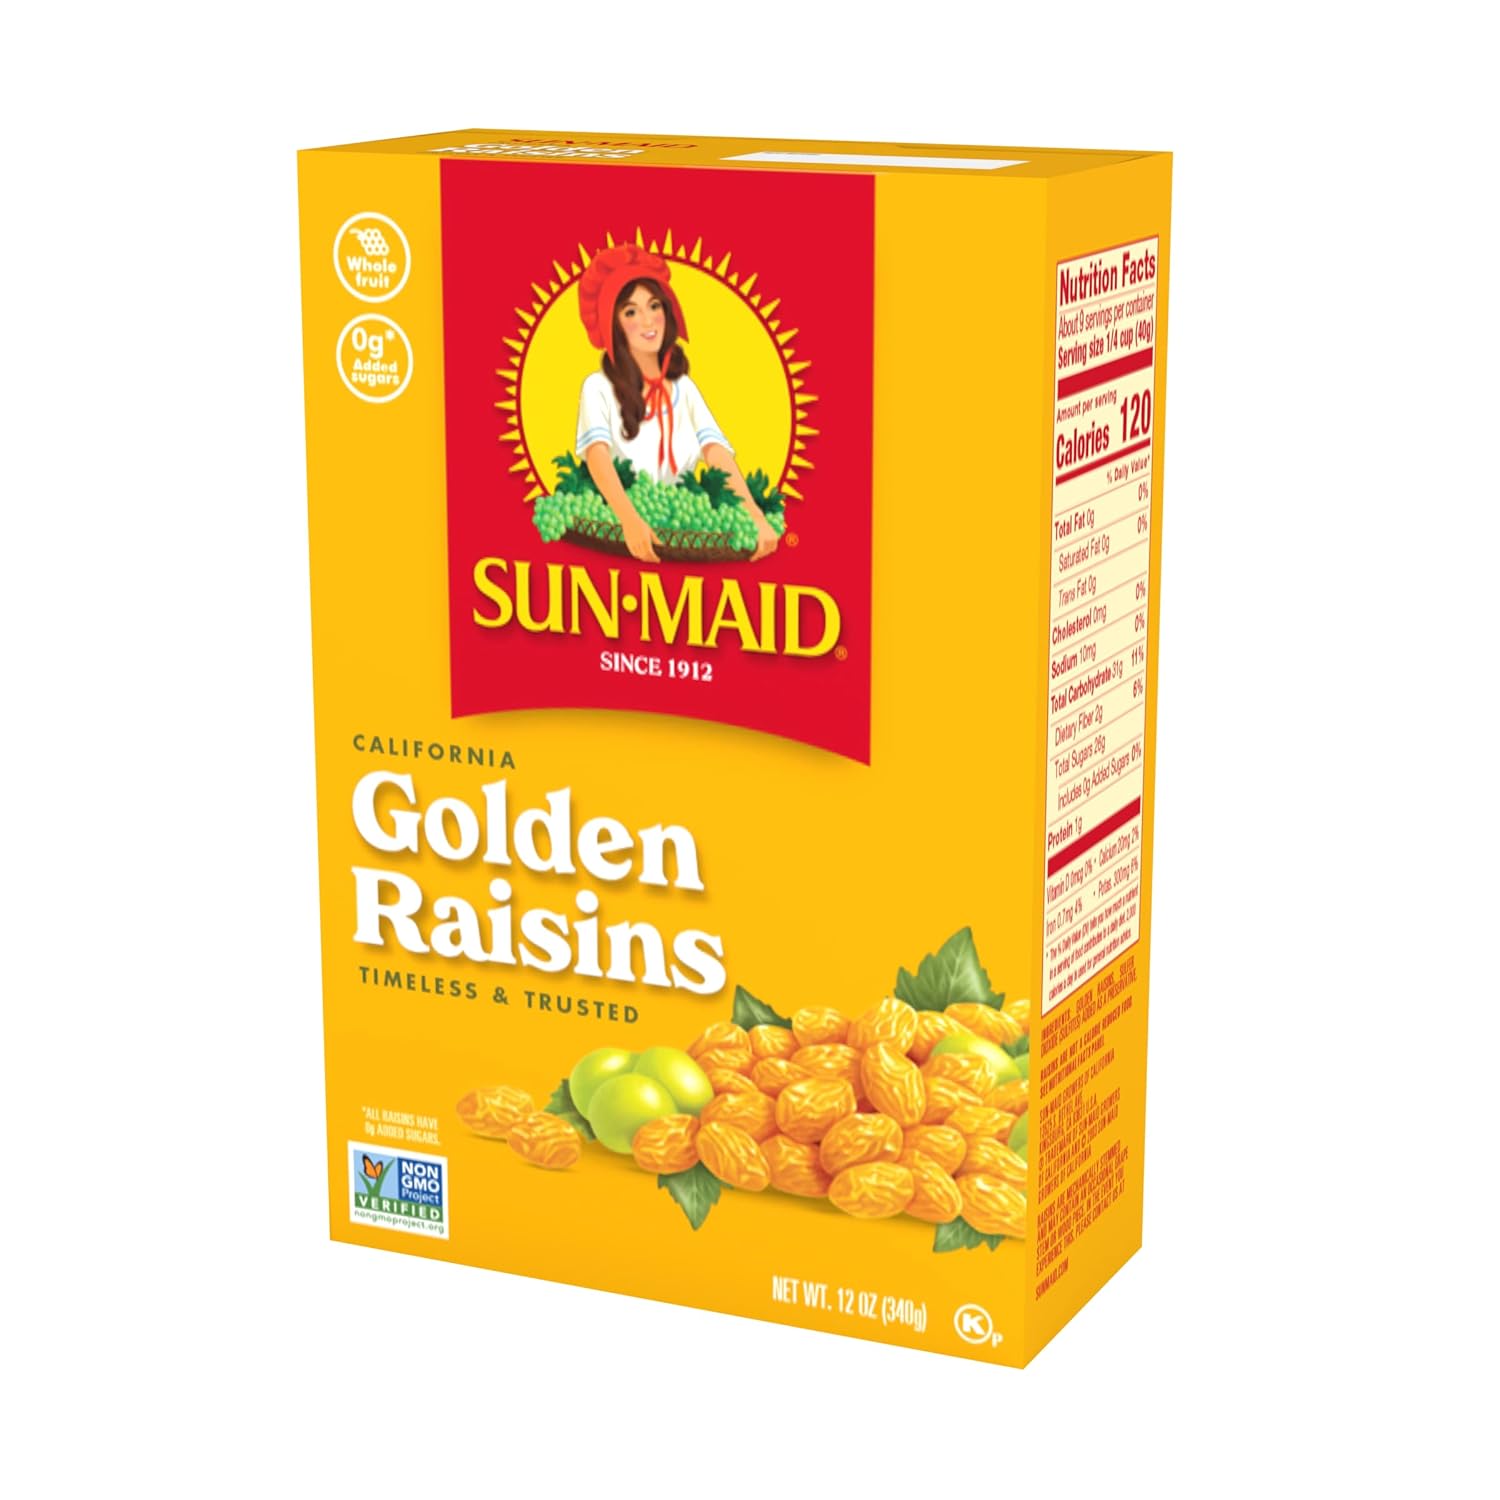 Sun-Maid California Golden Raisins - (12 Pack) 12 oz Sharing-Size Box - Dried Fruit Snack for Lunches, Snacks, and Natural Sweeteners : Everything Else